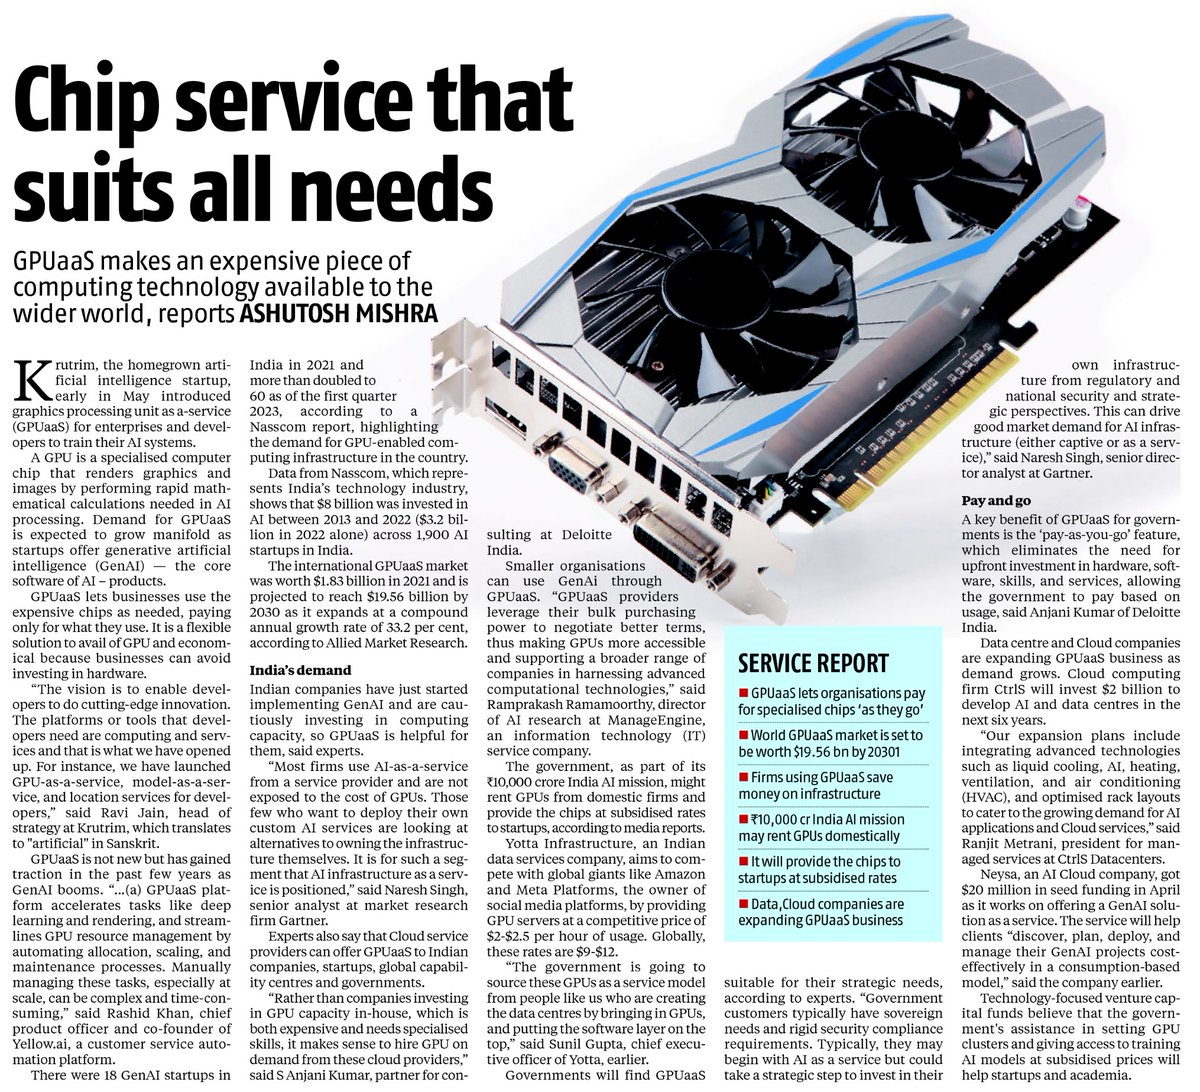 #GPU as a Service (GPUaaS) not only lets businesses use expensive chips but also presents itself as a flexible and economical solution, encouraging businesses to avoid heavy hardware investments. deloi.tt/3WHhrt6 #AI #GenAI @bsindia